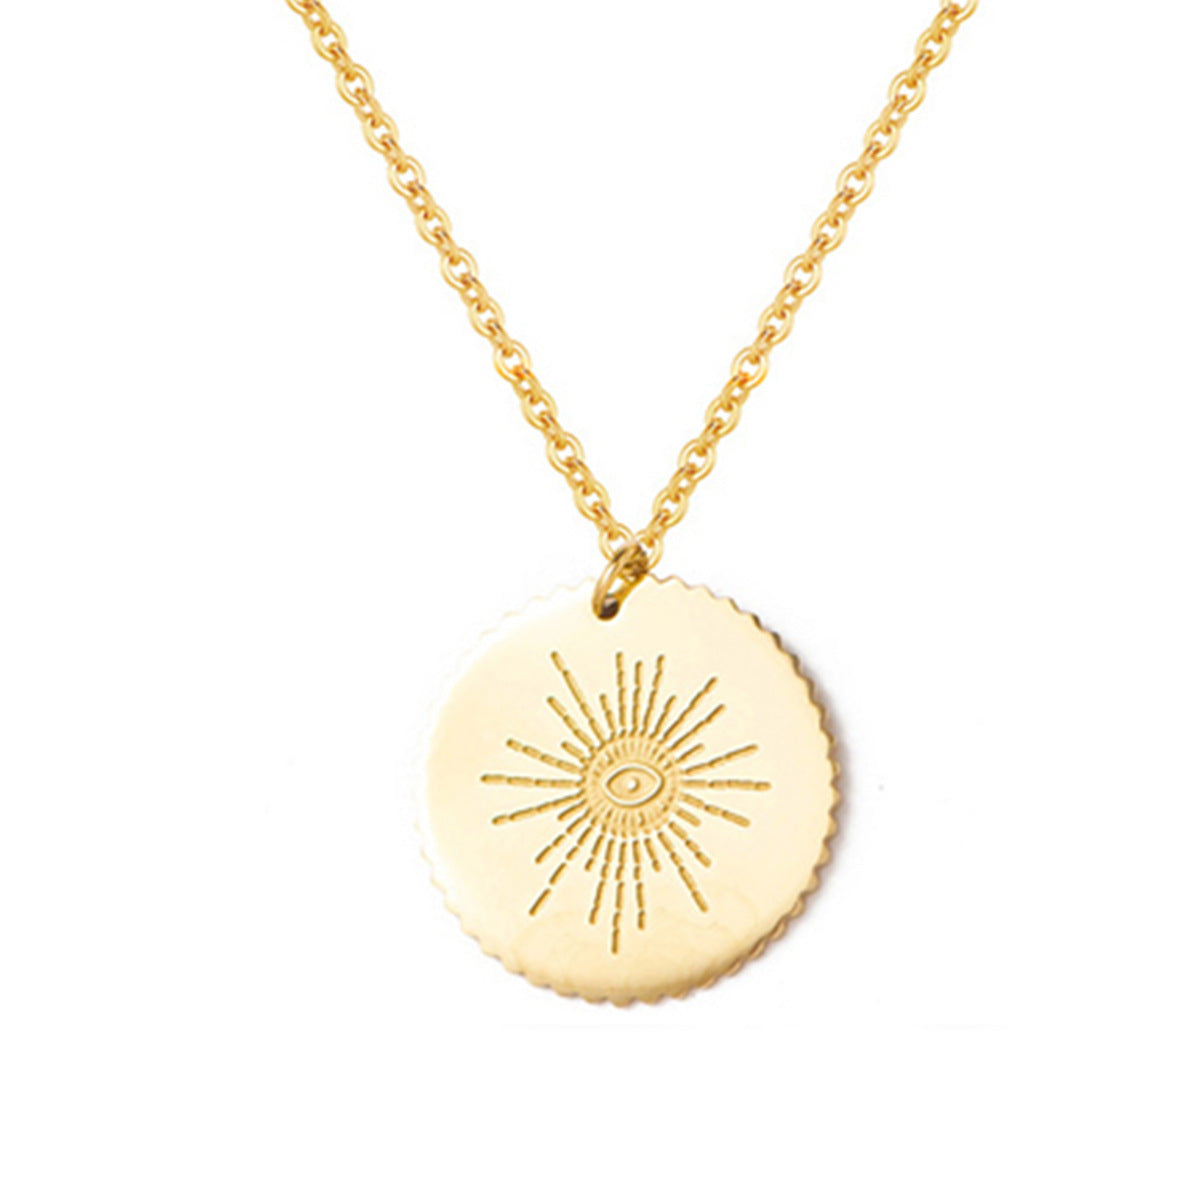 Bohemia Gold Hammered Coin Necklace, Evil Eye Sun Star Pendant Necklace AL772